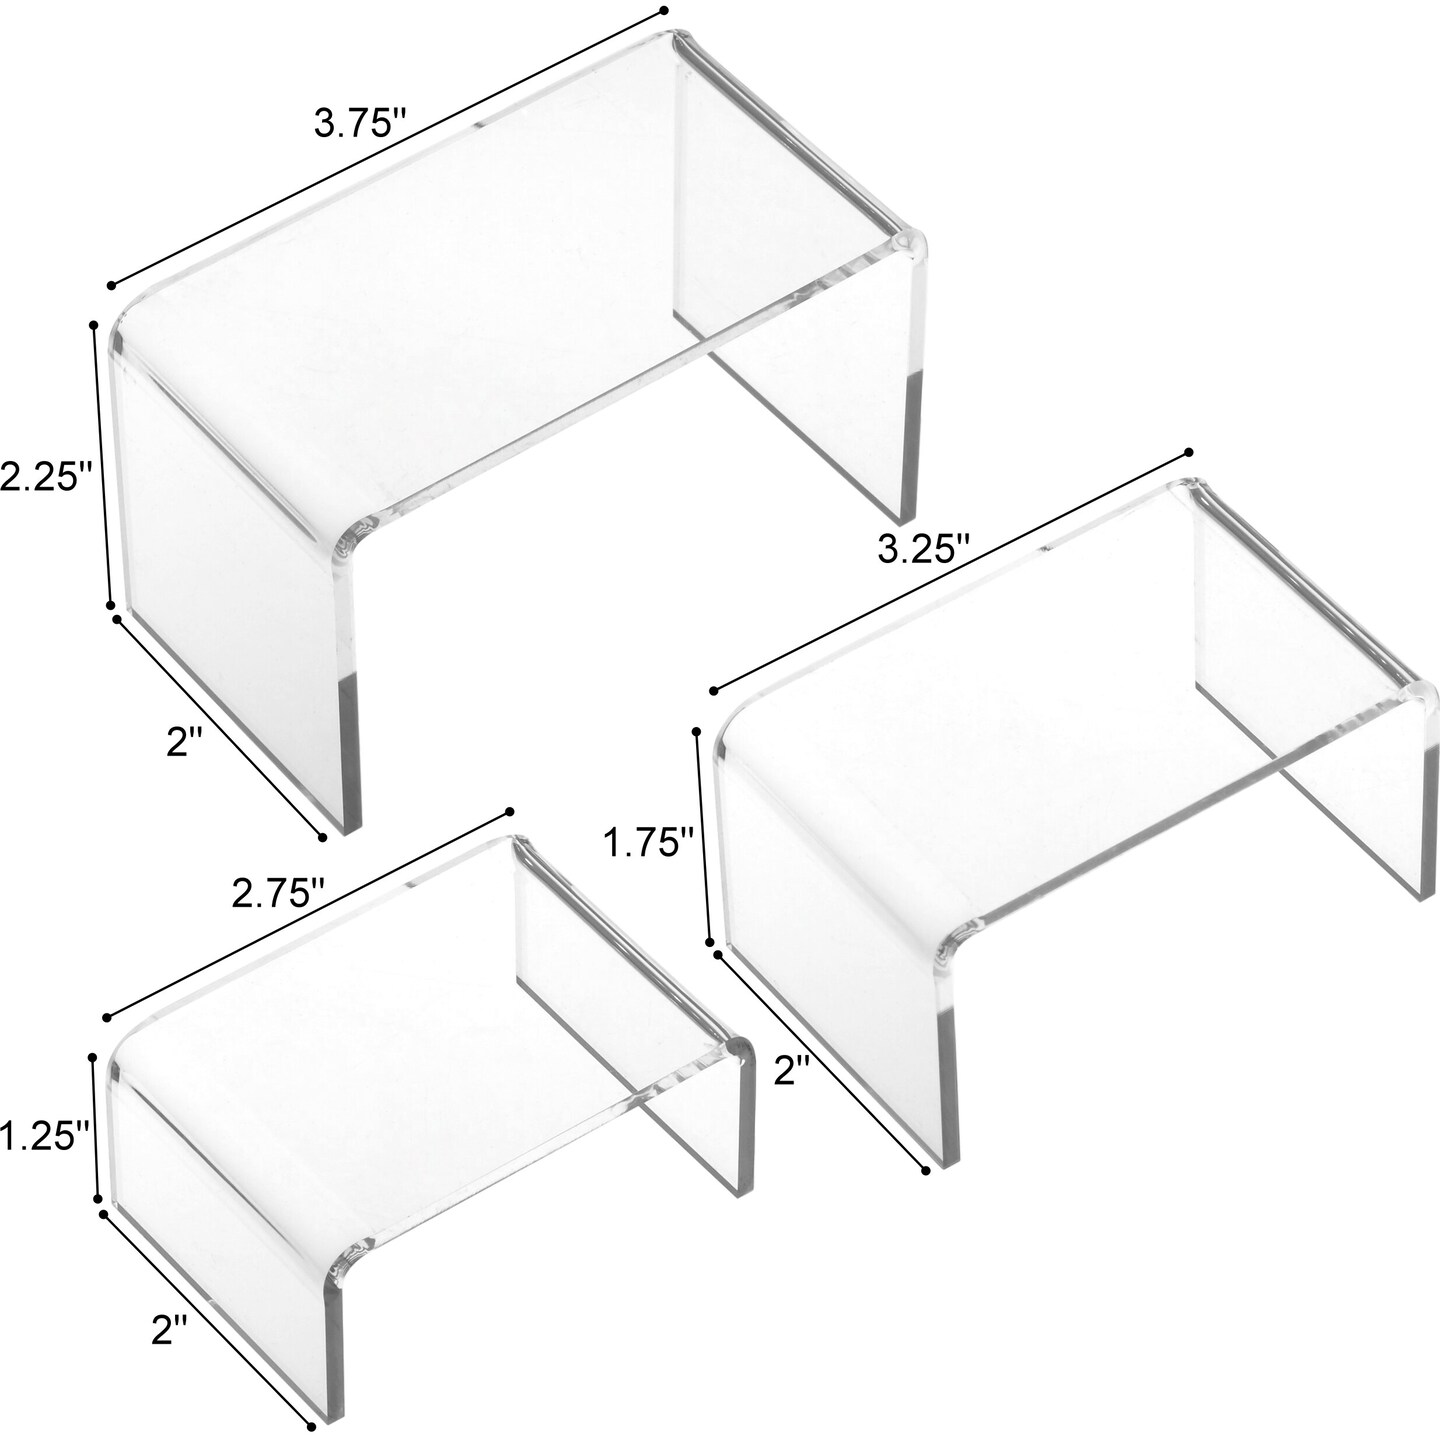 9 Clear Acrylic Risers Jewelry Display Stands